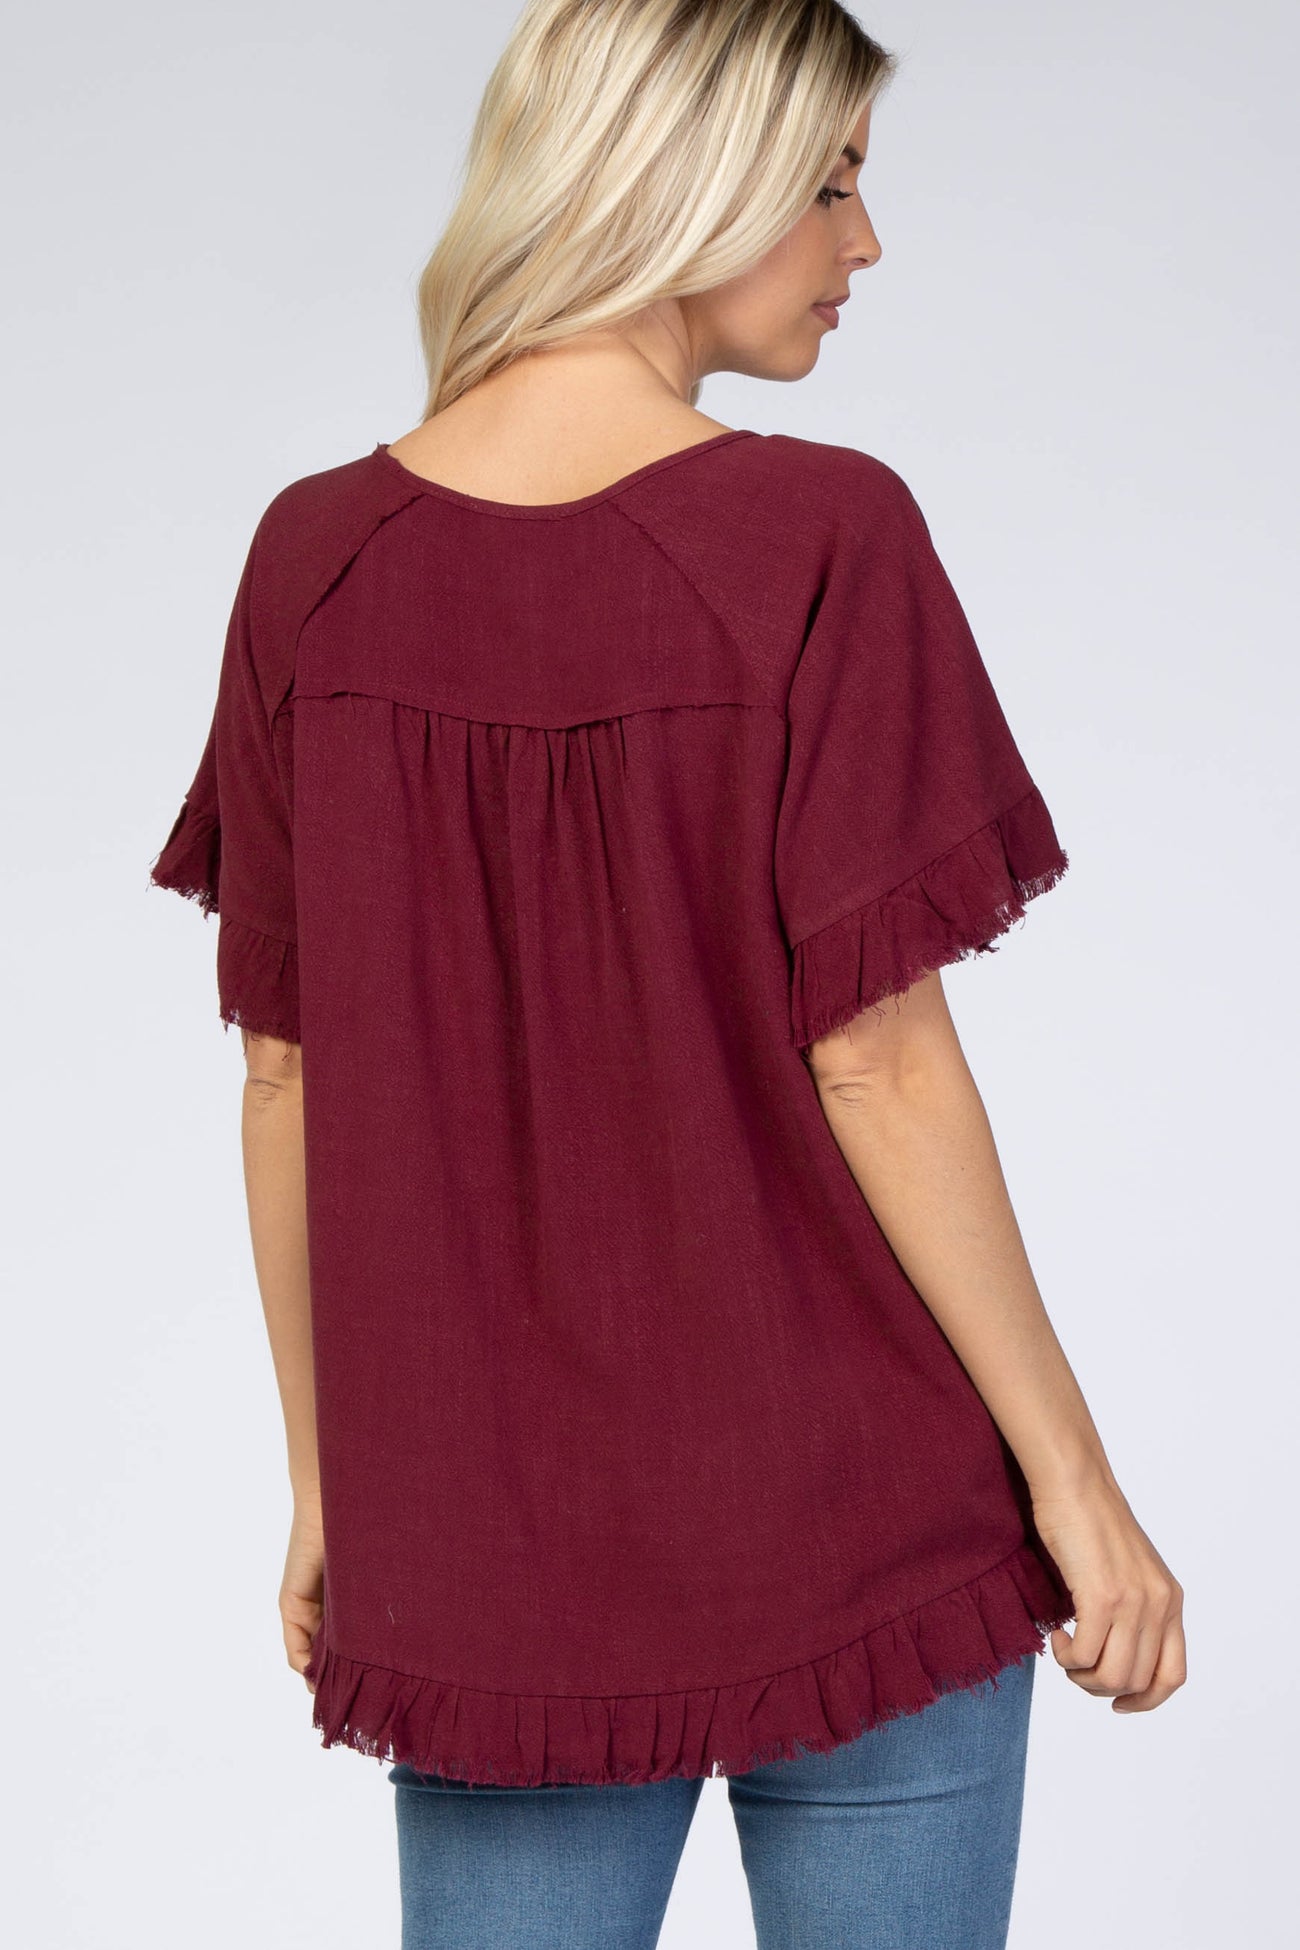 Maternity Blouse with Ruffle Trim Fringe - Maternity Shirt Tops for Women -  Blouses Work Shirts